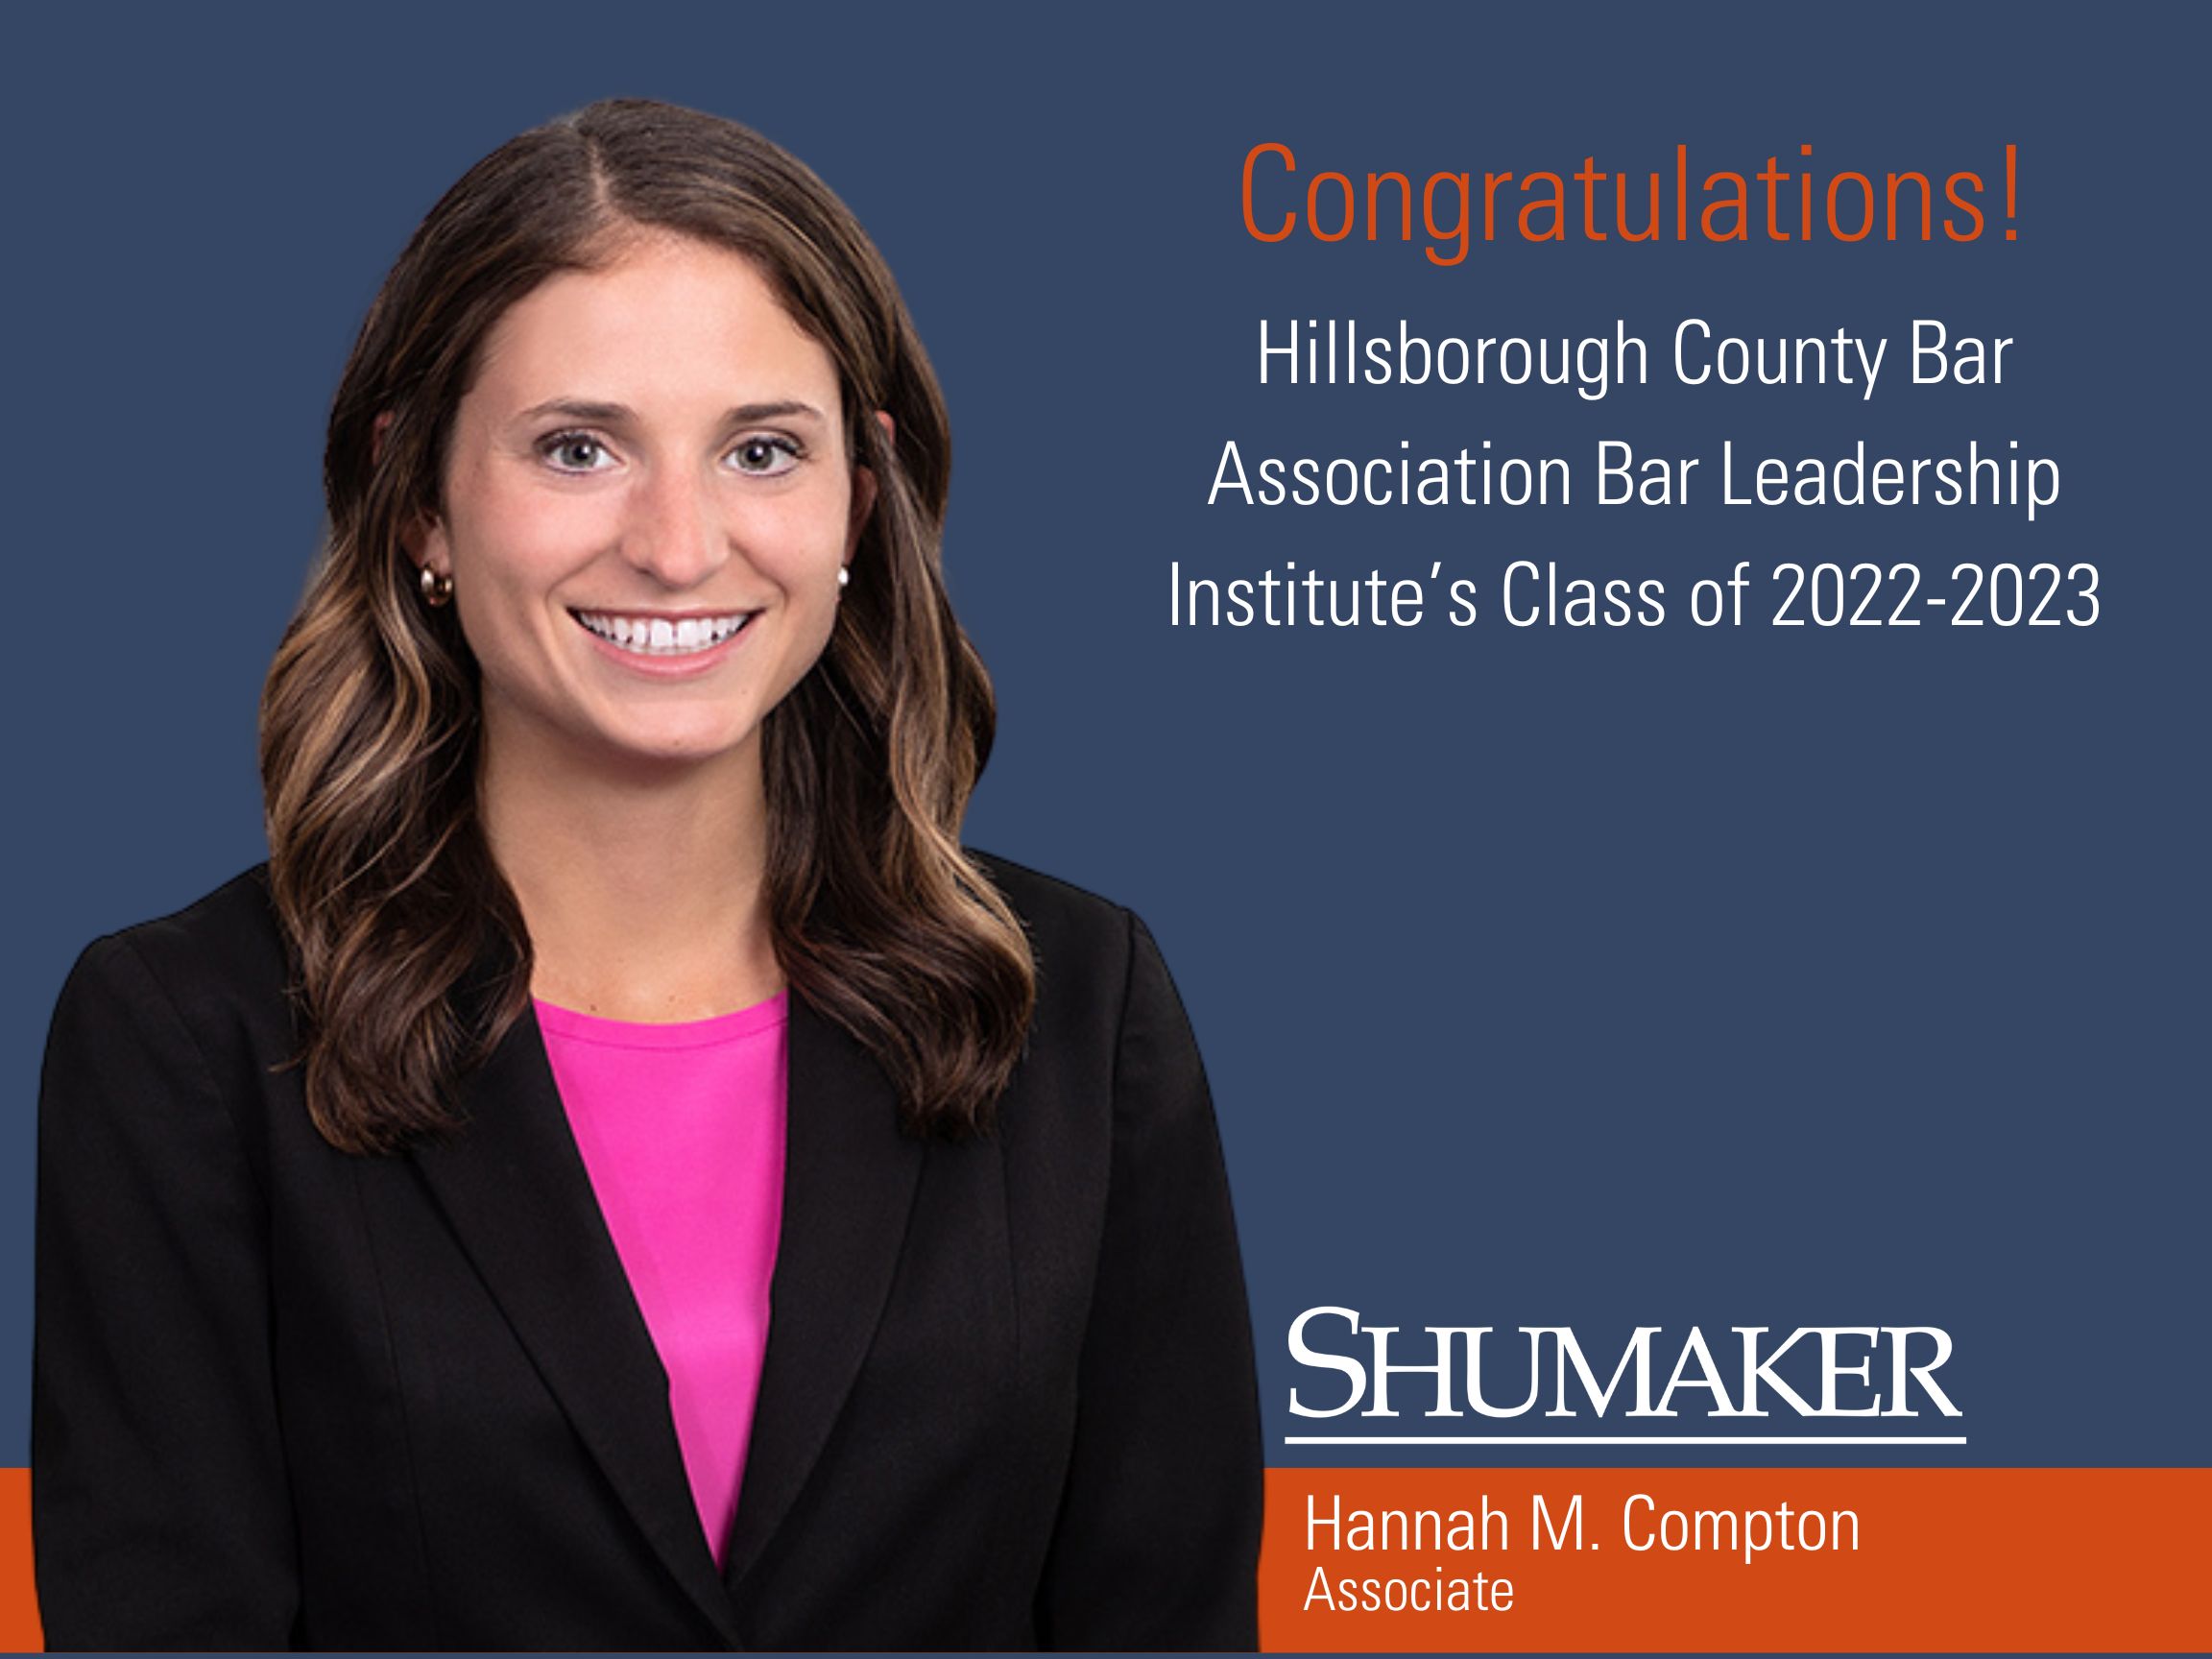 Hannah M. Compton Selected for the Hillsborough County Bar Association Bar Leadership Institute’s Class of 2022-2023